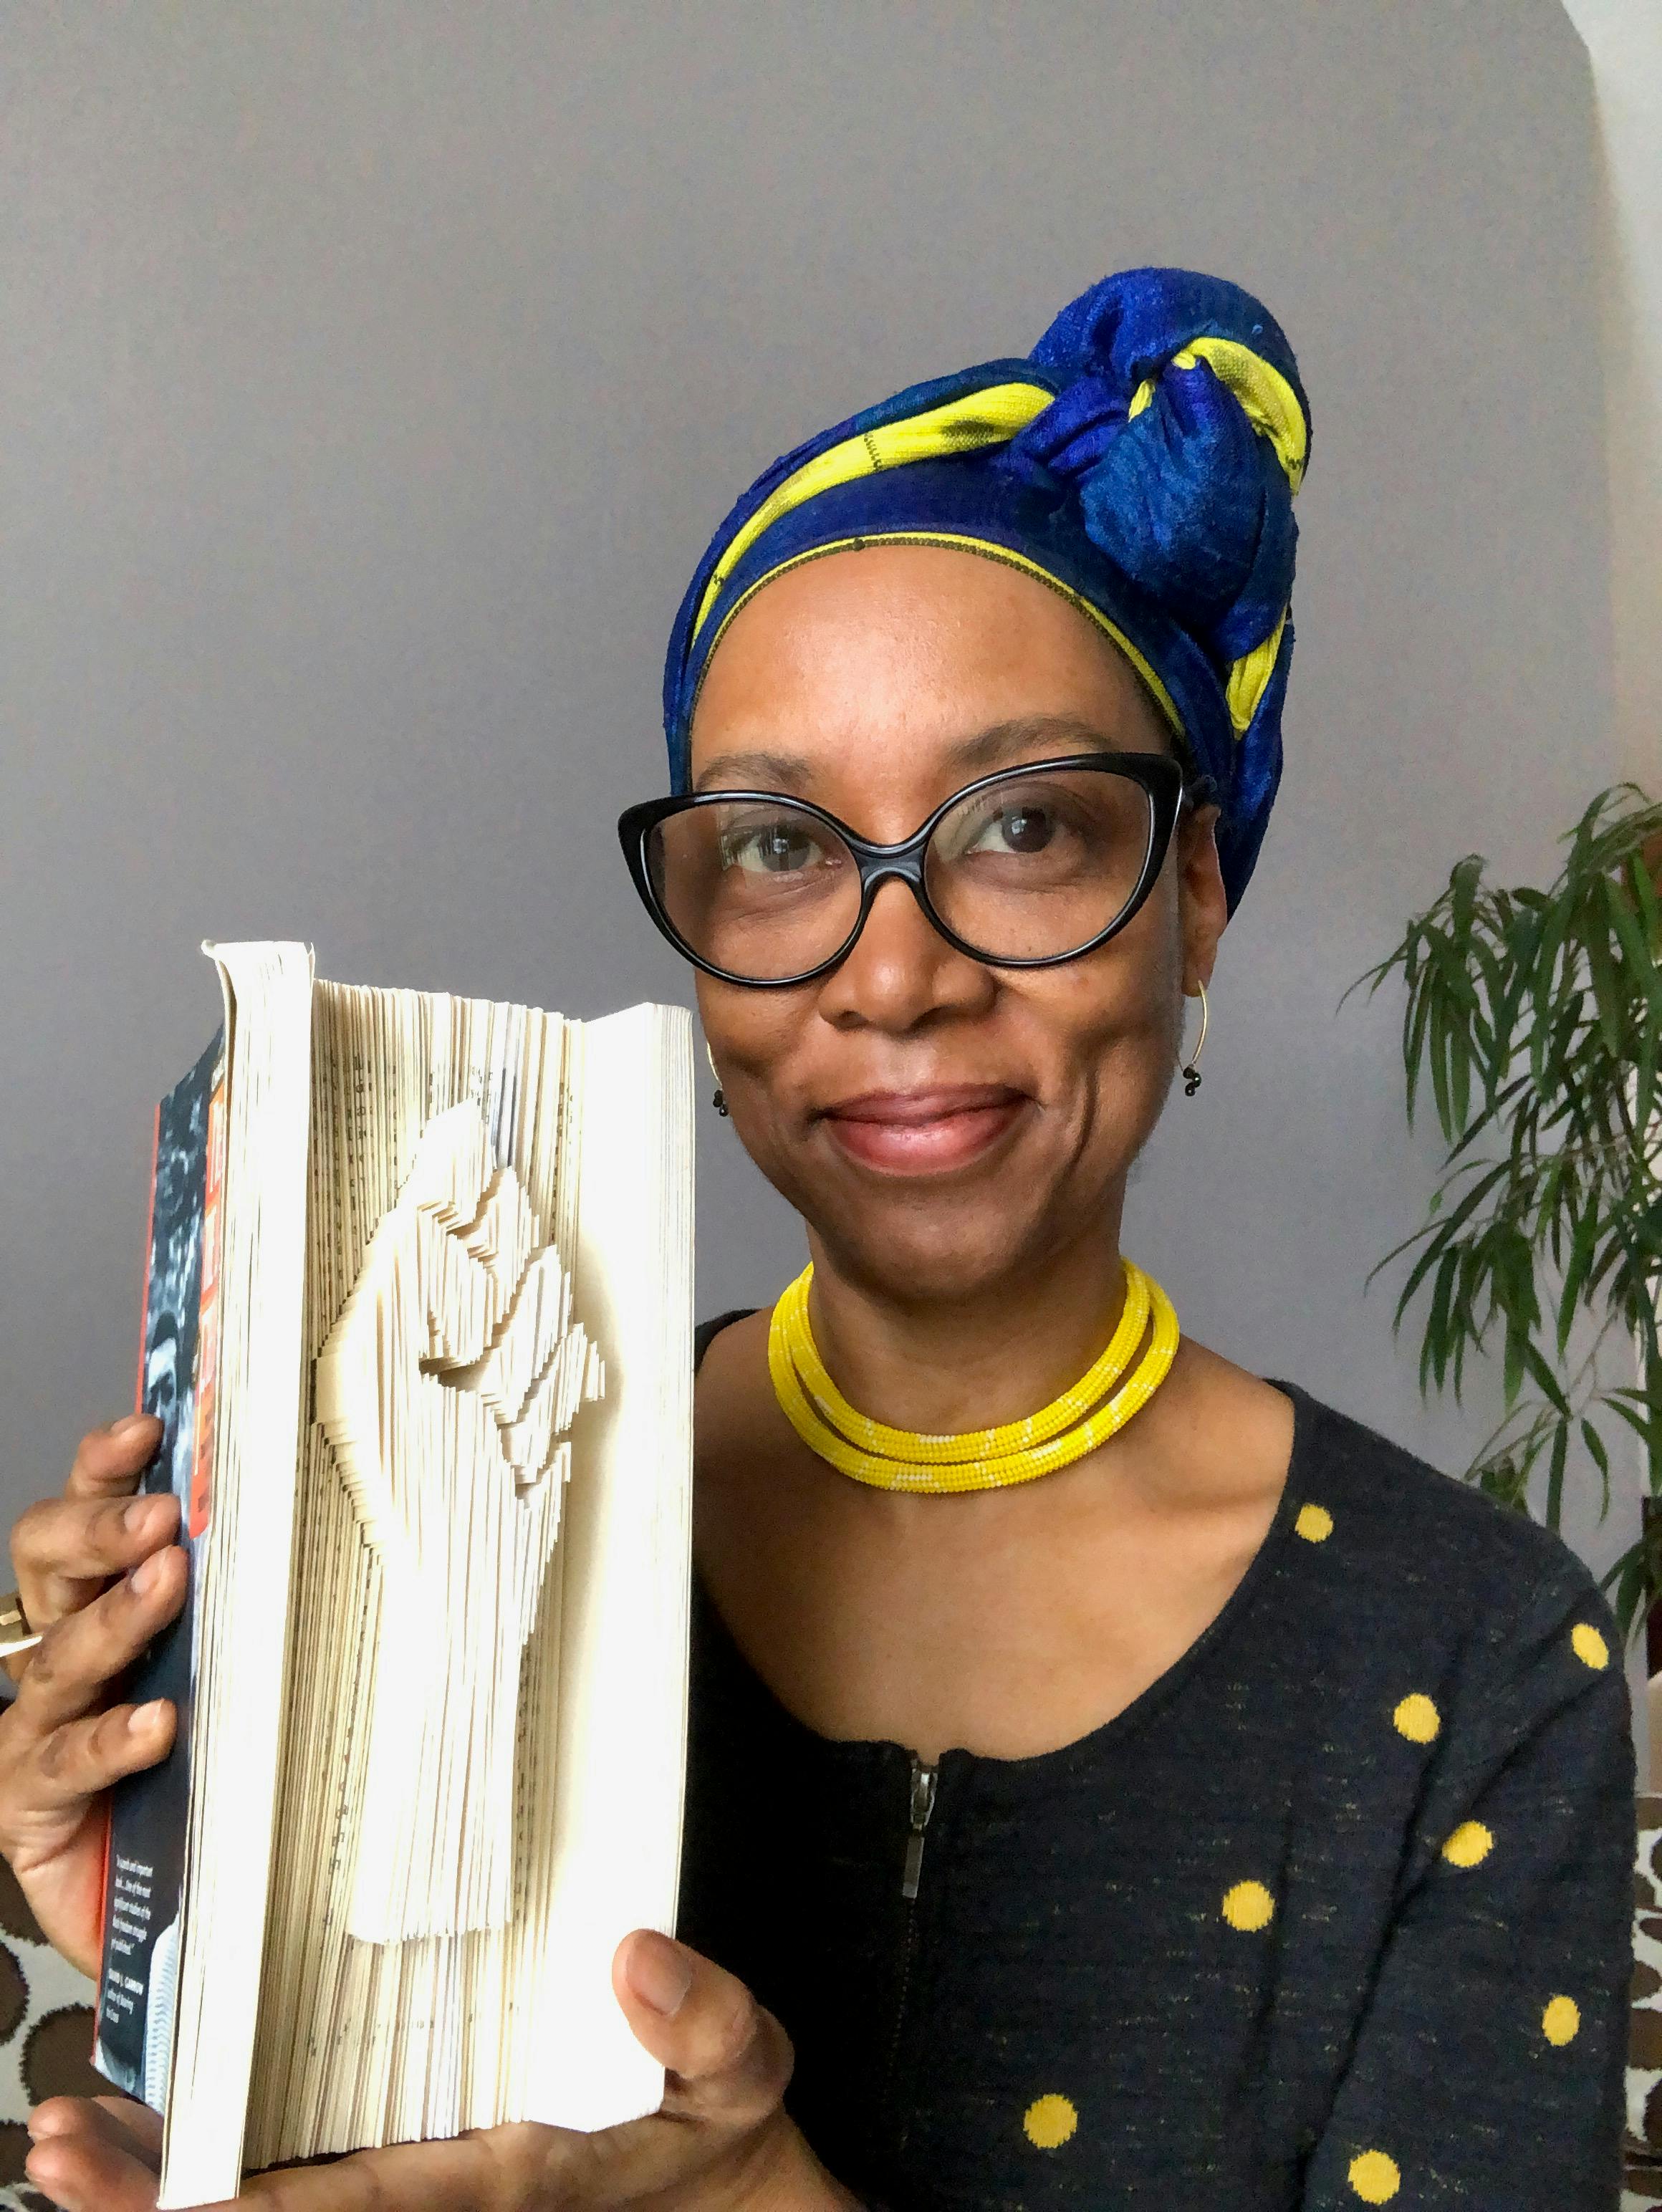 portrait of sonya clark holding book with solidarity fist symbol carved into the ends of the pages